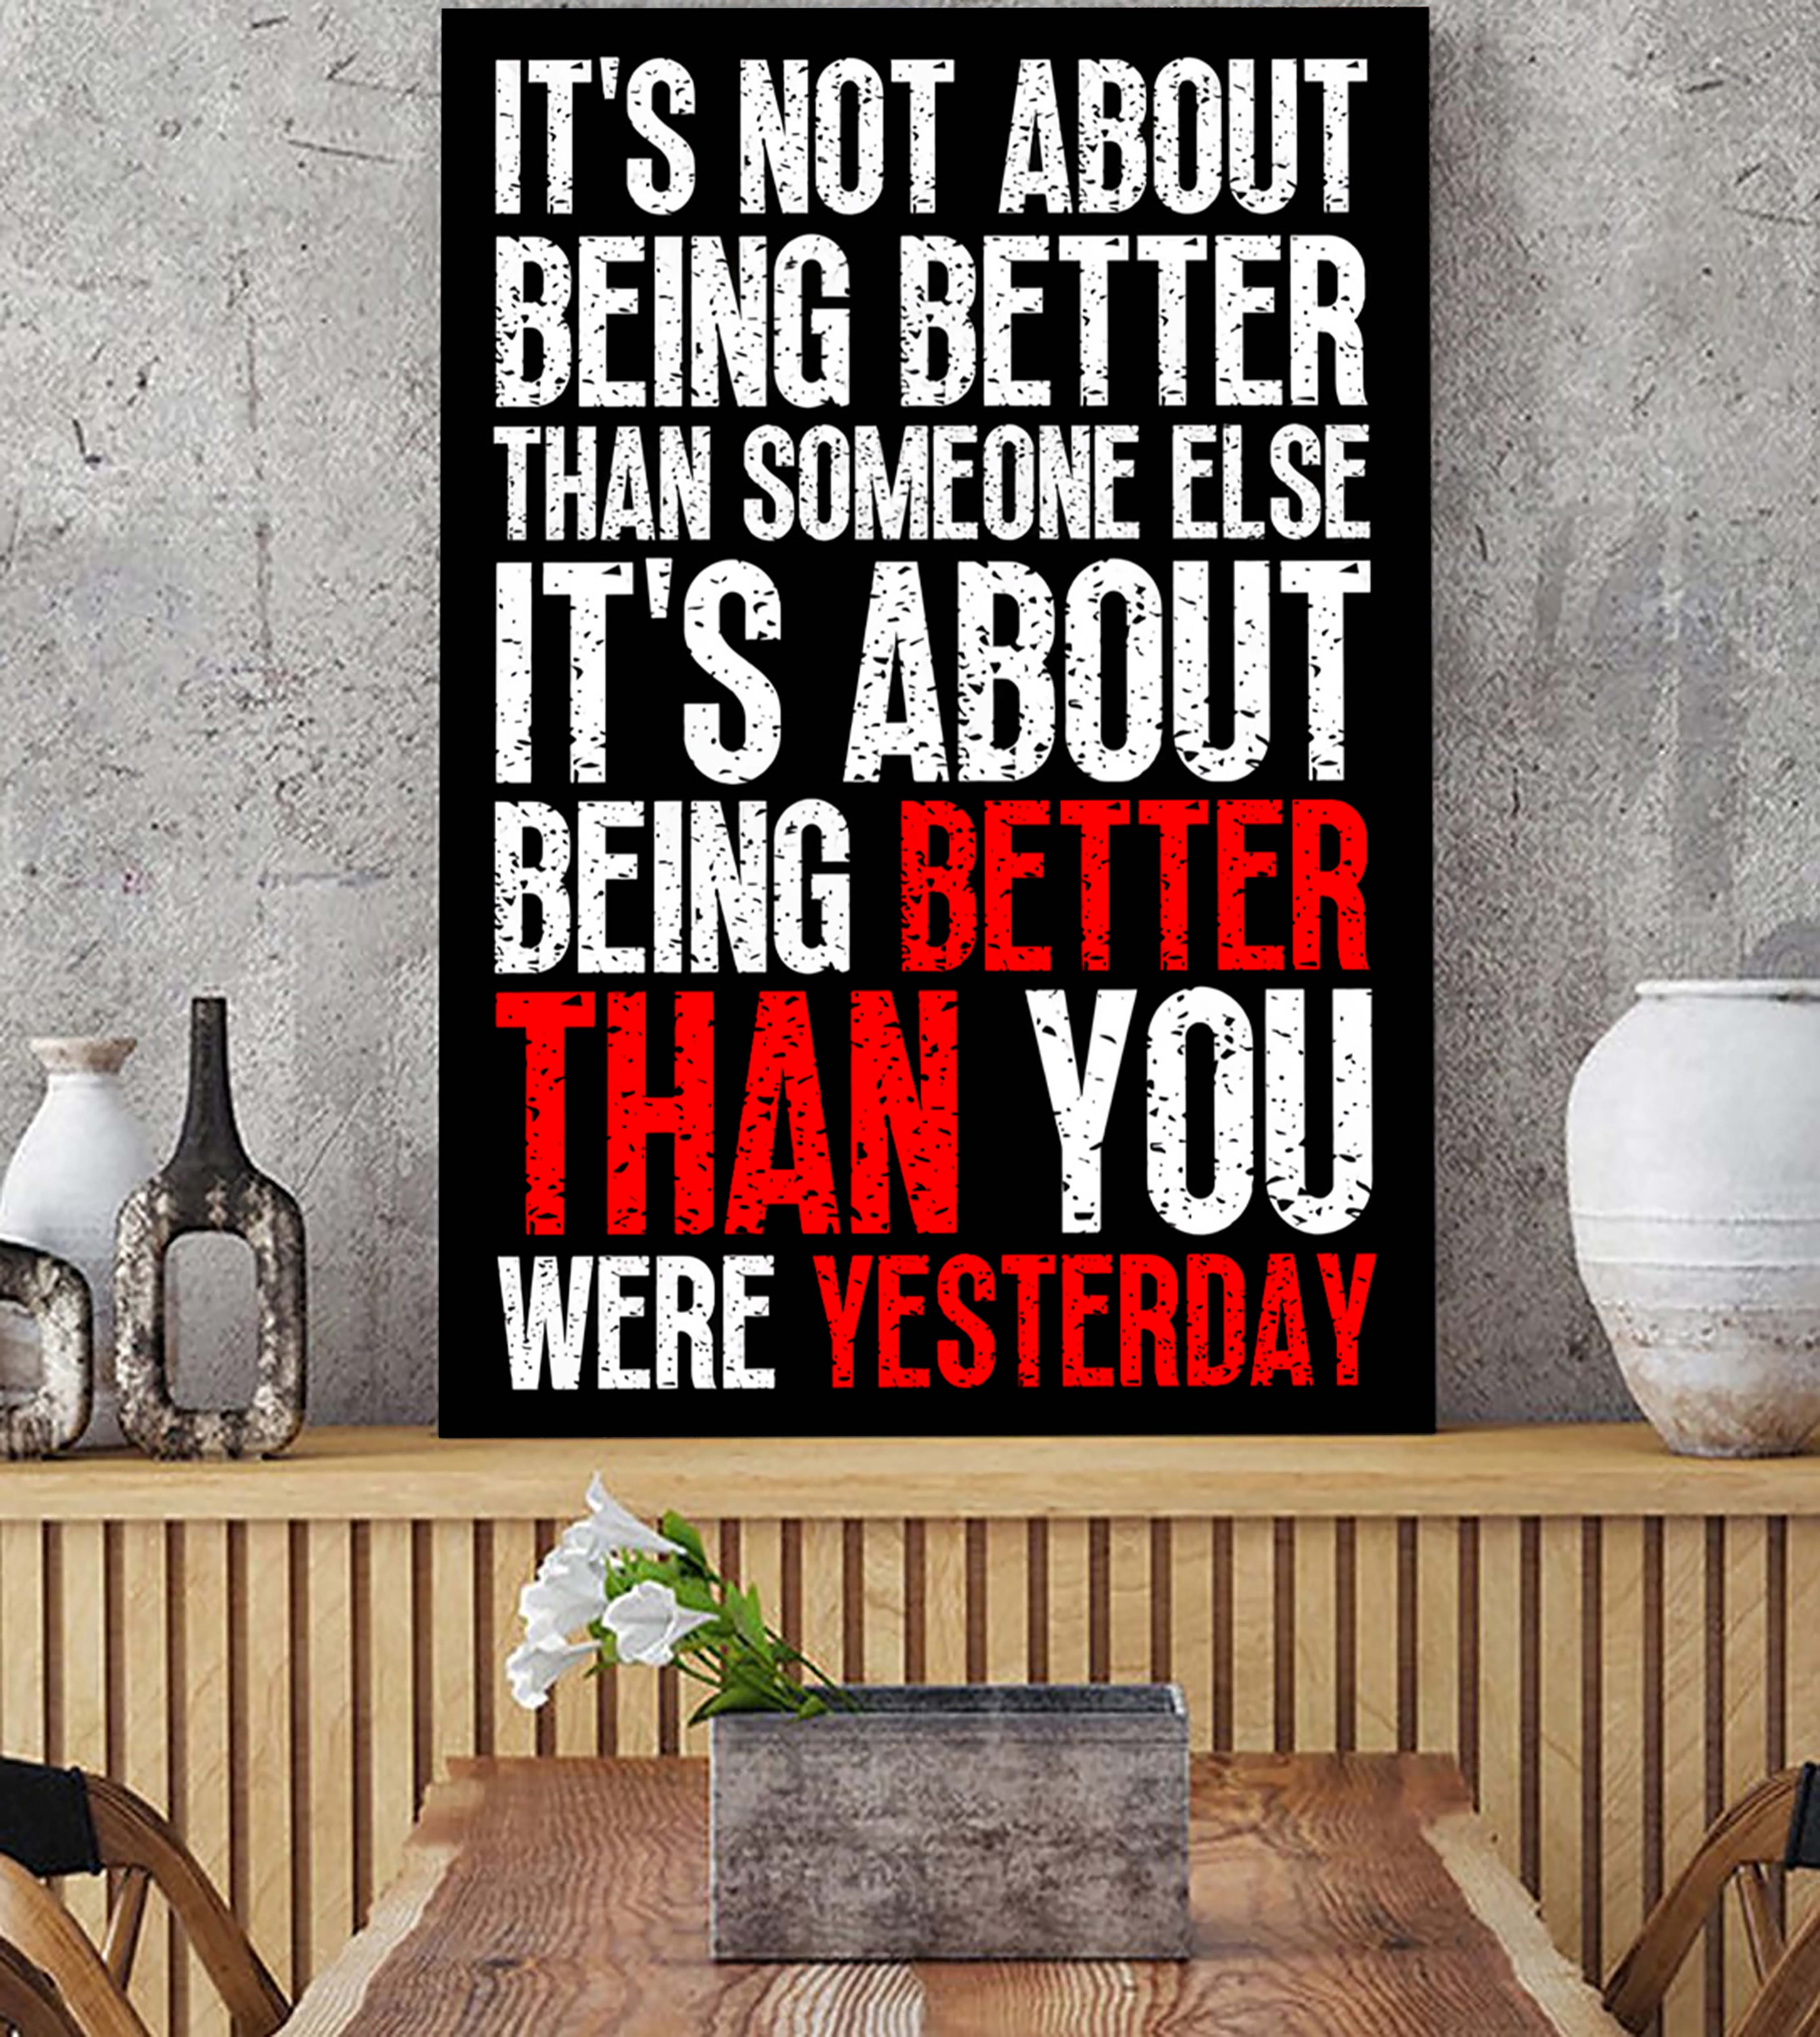 It is not about better than someone else, It is about being better than you were the day before